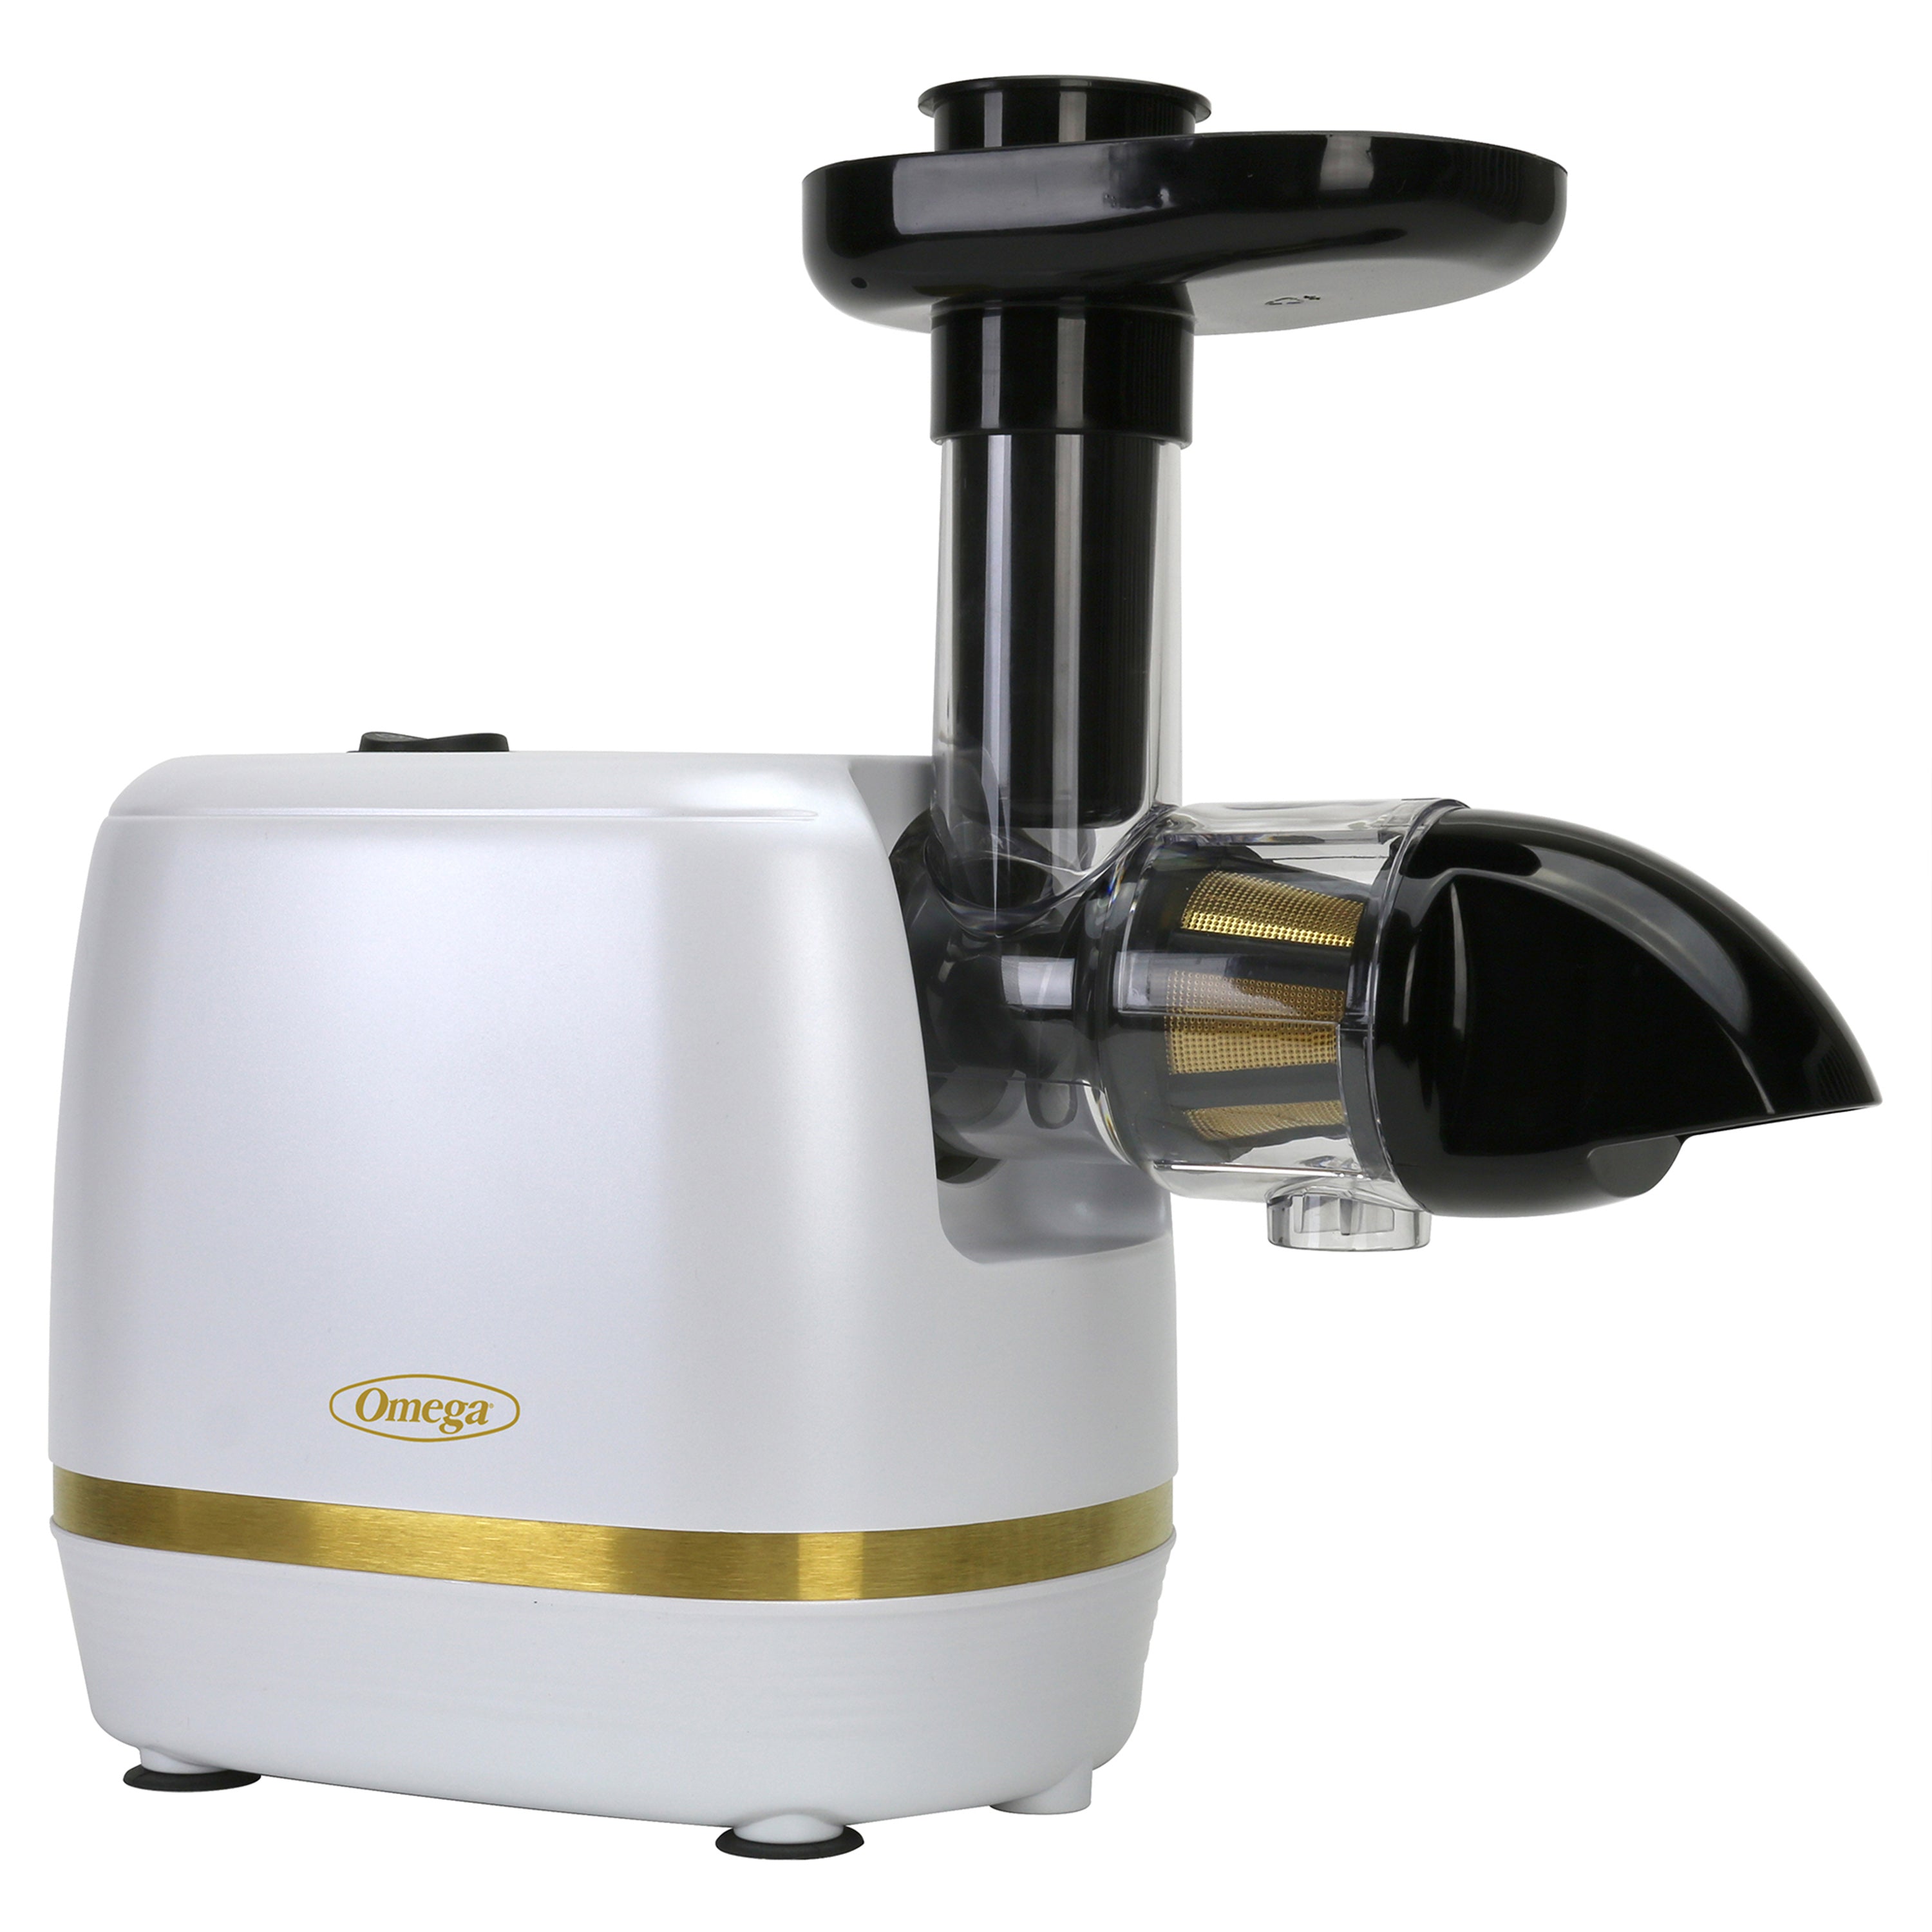 Omega - H3000RWH13, Omega Cold Press 365 Compact Masticating Horizontal Juicer, 150W Low-Speed 3-Stage Auger, in White